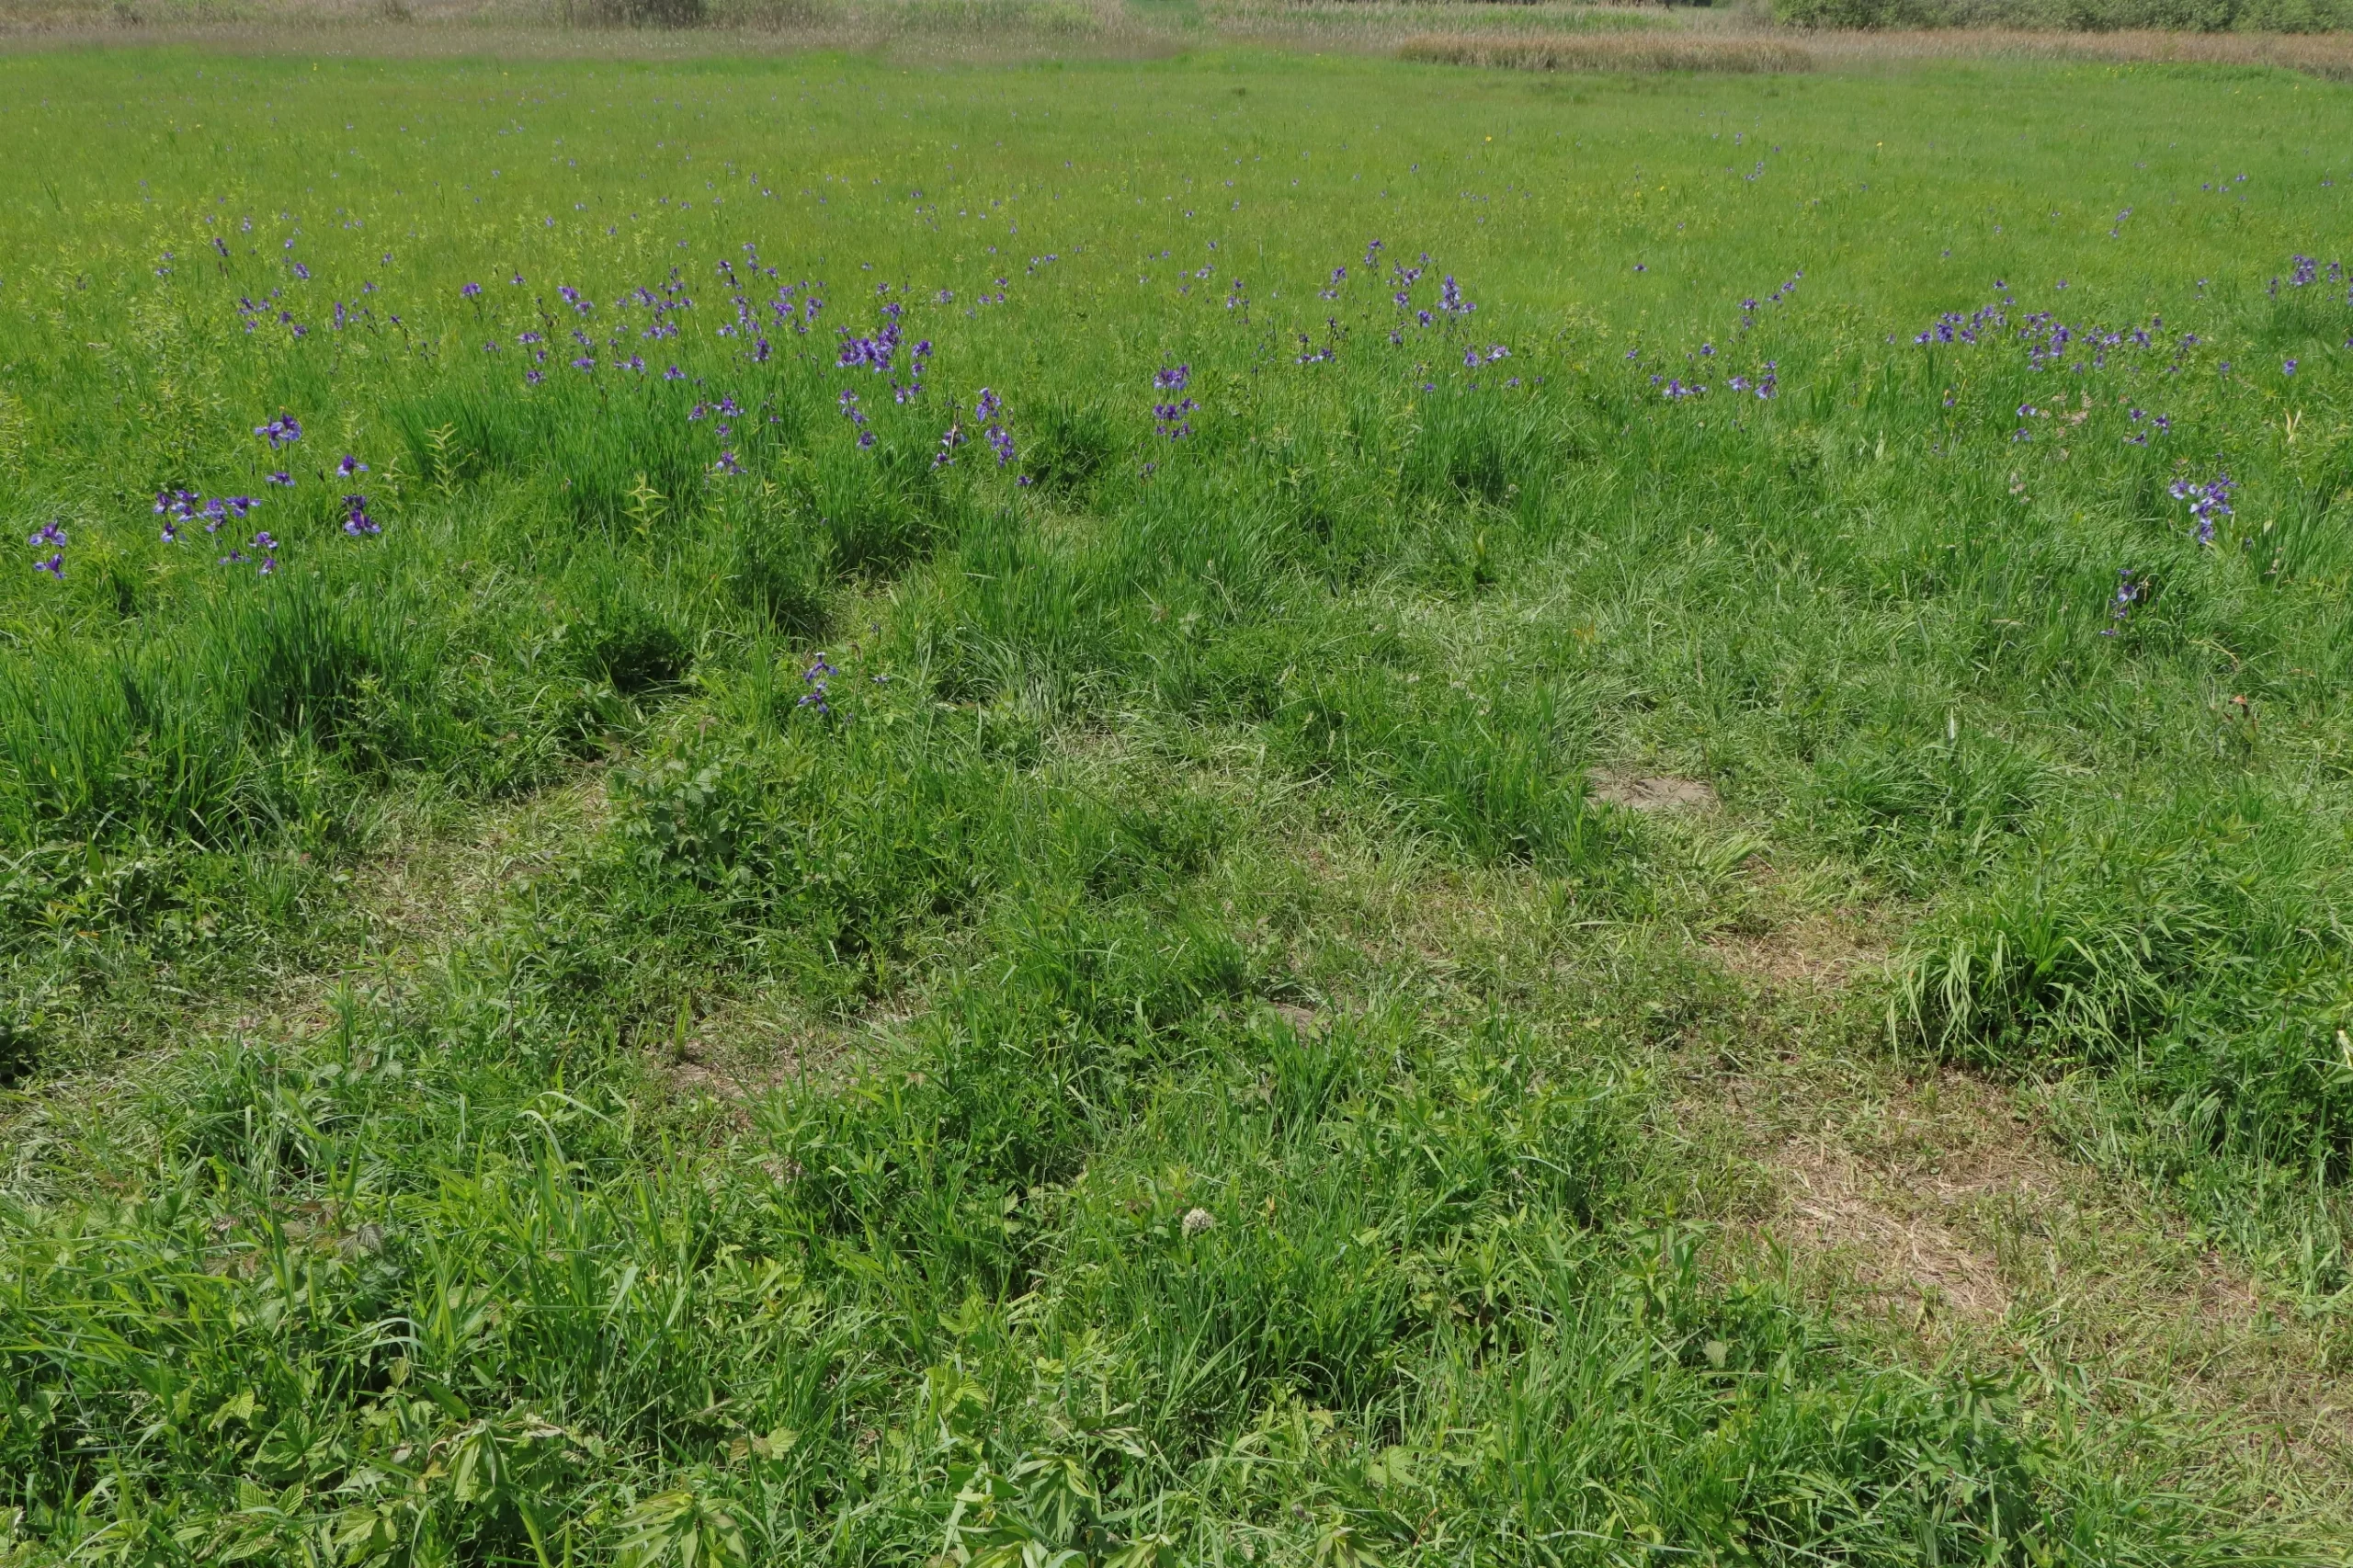 A green meadow with flattened, already withered grass. In the background grow the purple coloured Siberian iris.